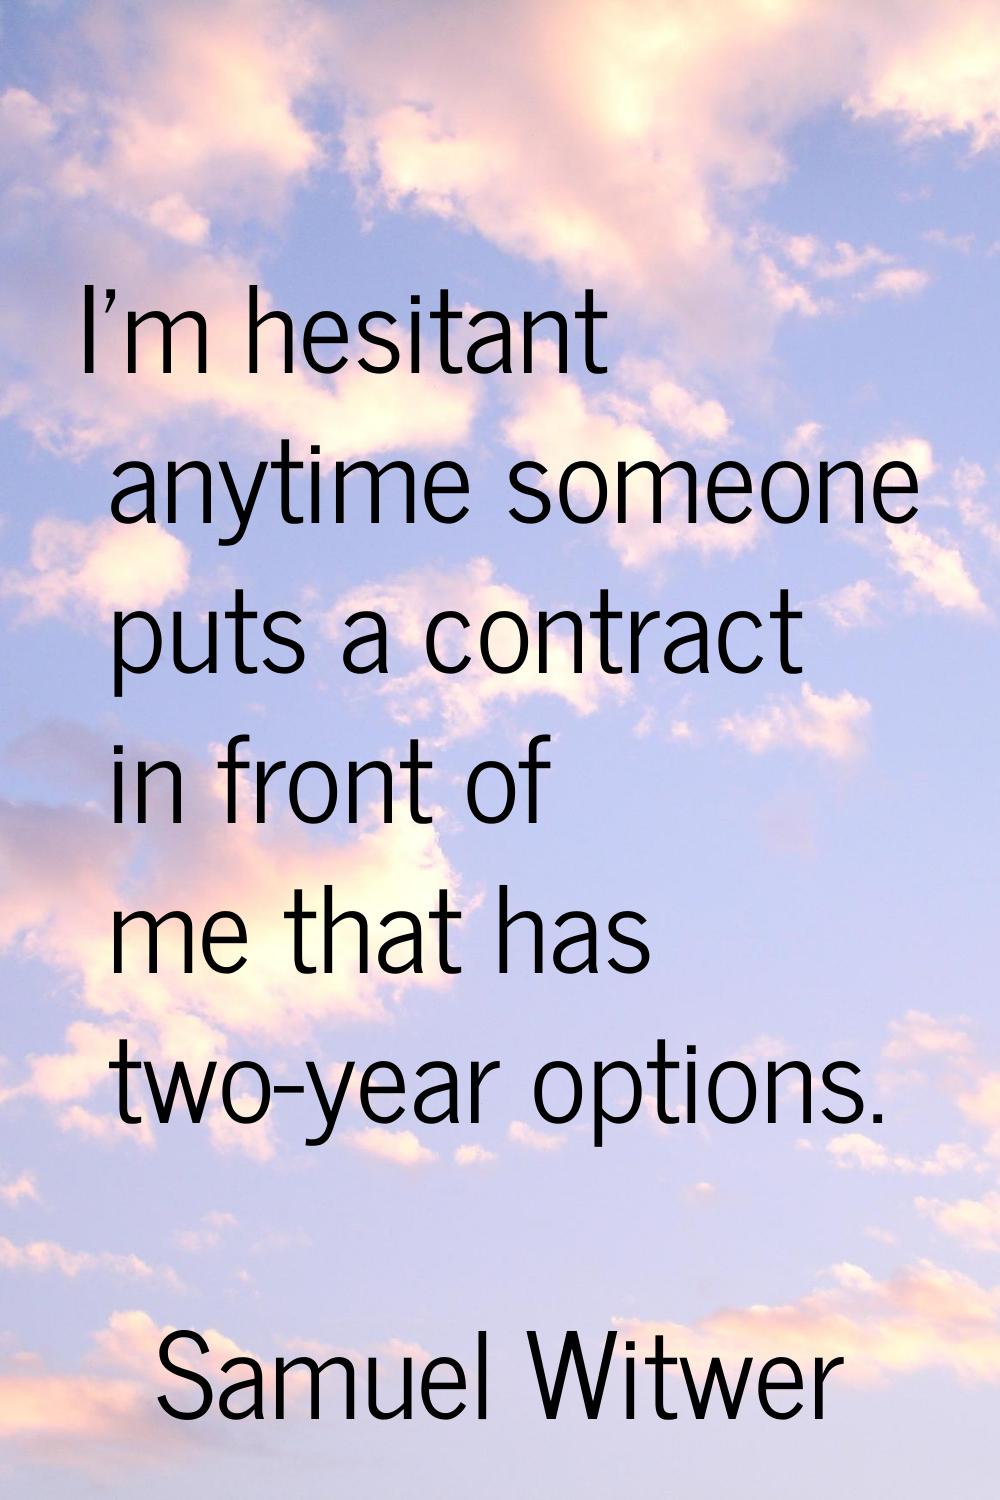 I'm hesitant anytime someone puts a contract in front of me that has two-year options.